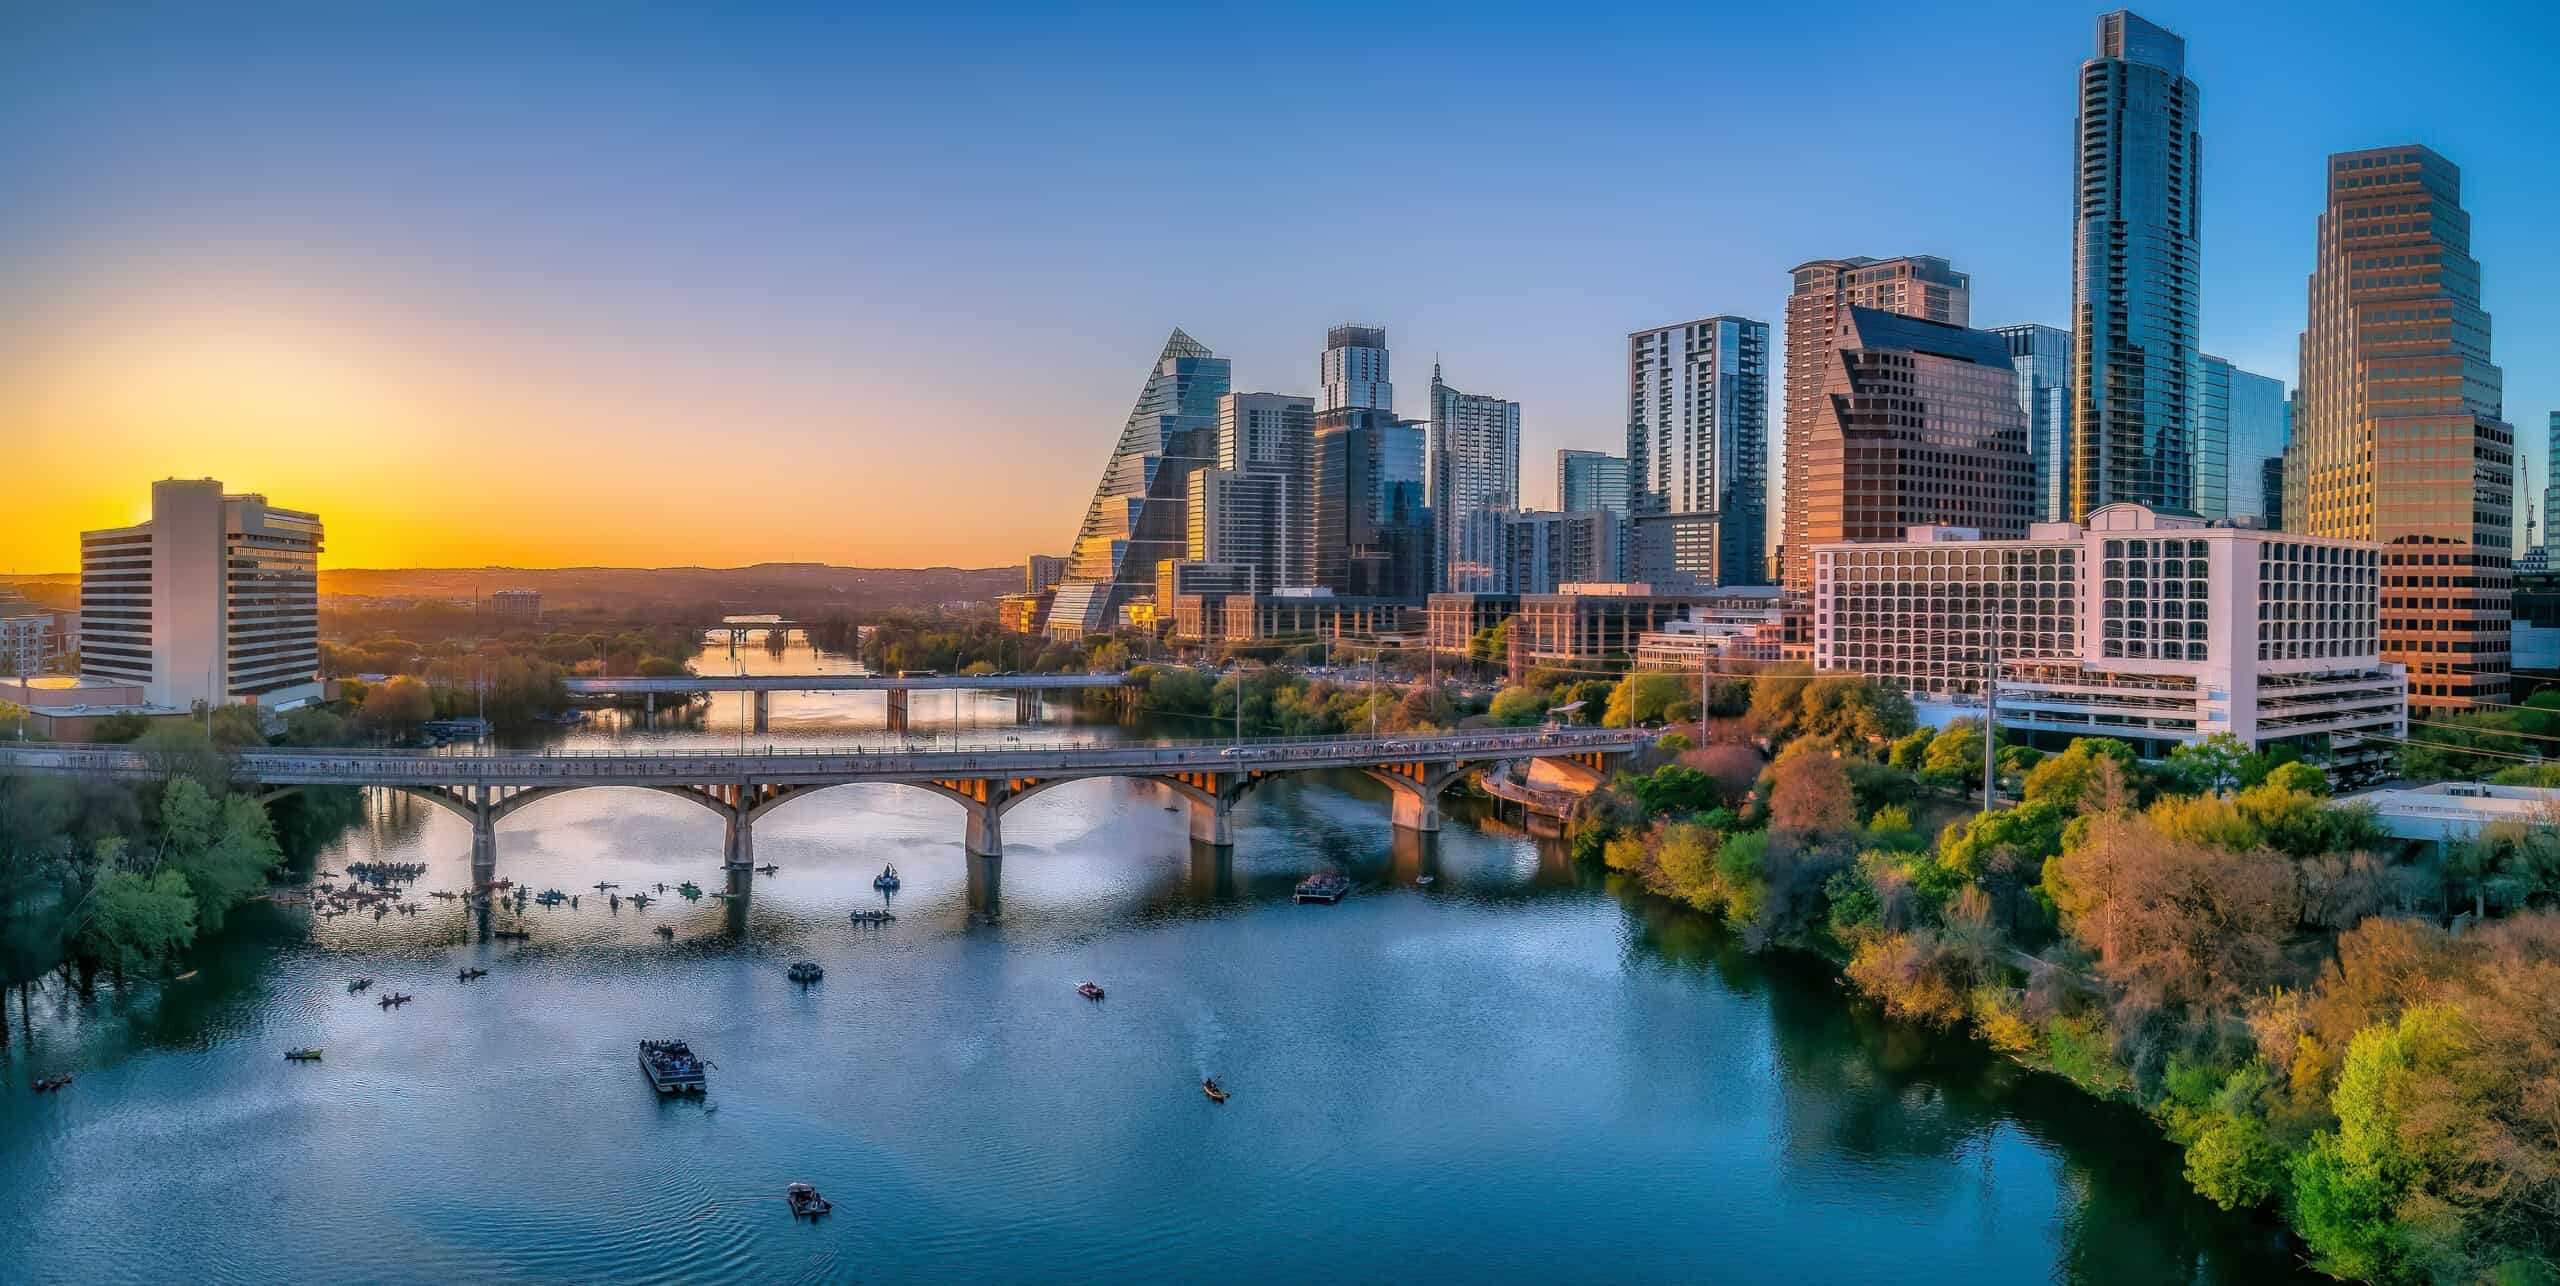 11 cool things to do in Austin, Texas